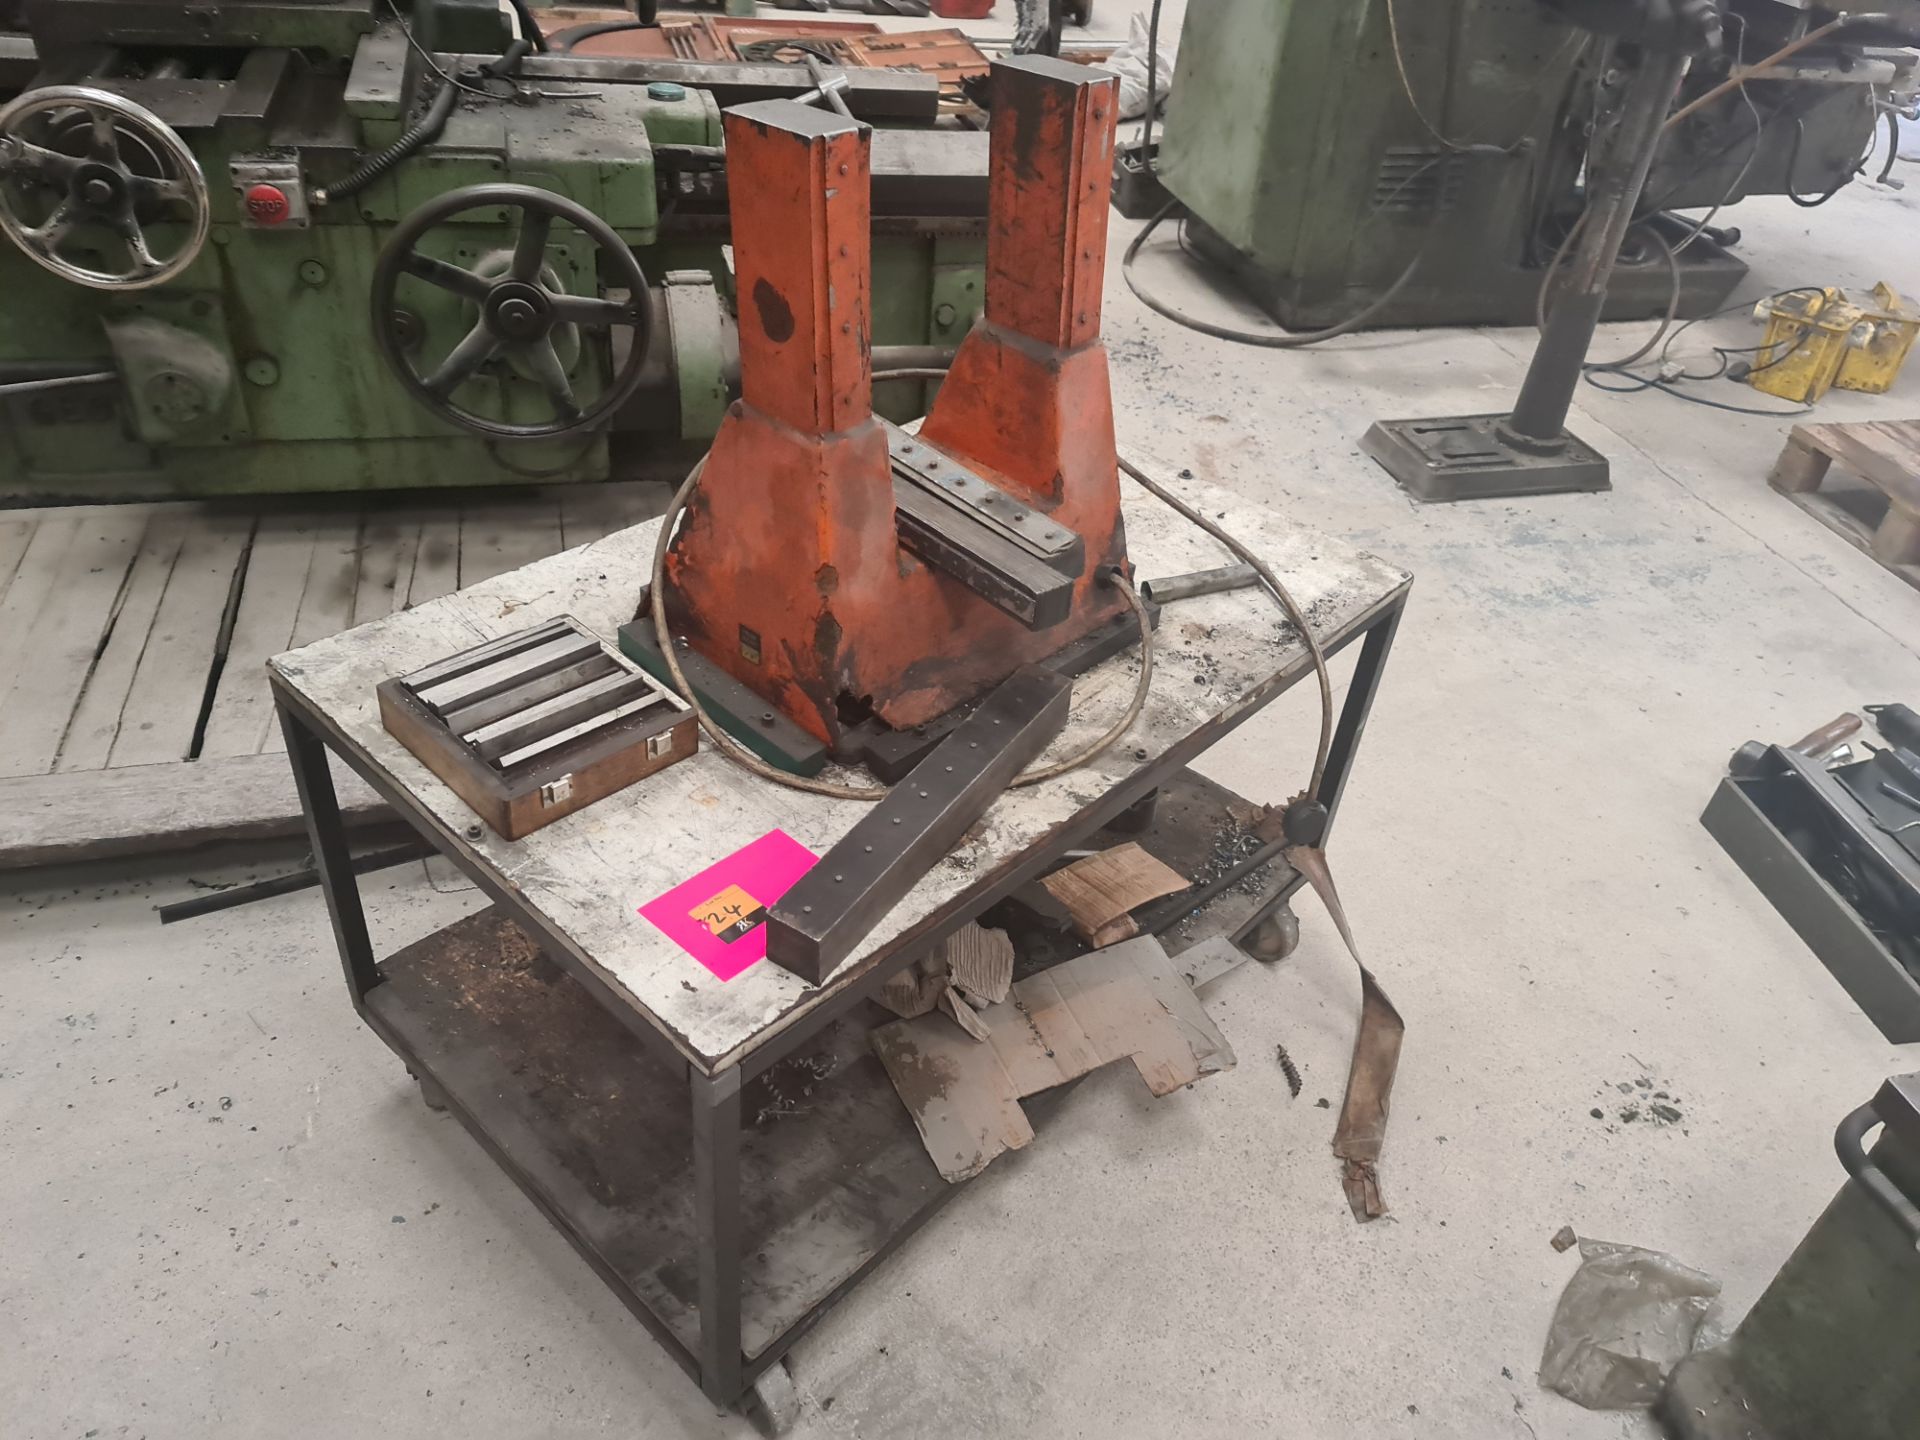 Bearing heater on trolley with ancillaries